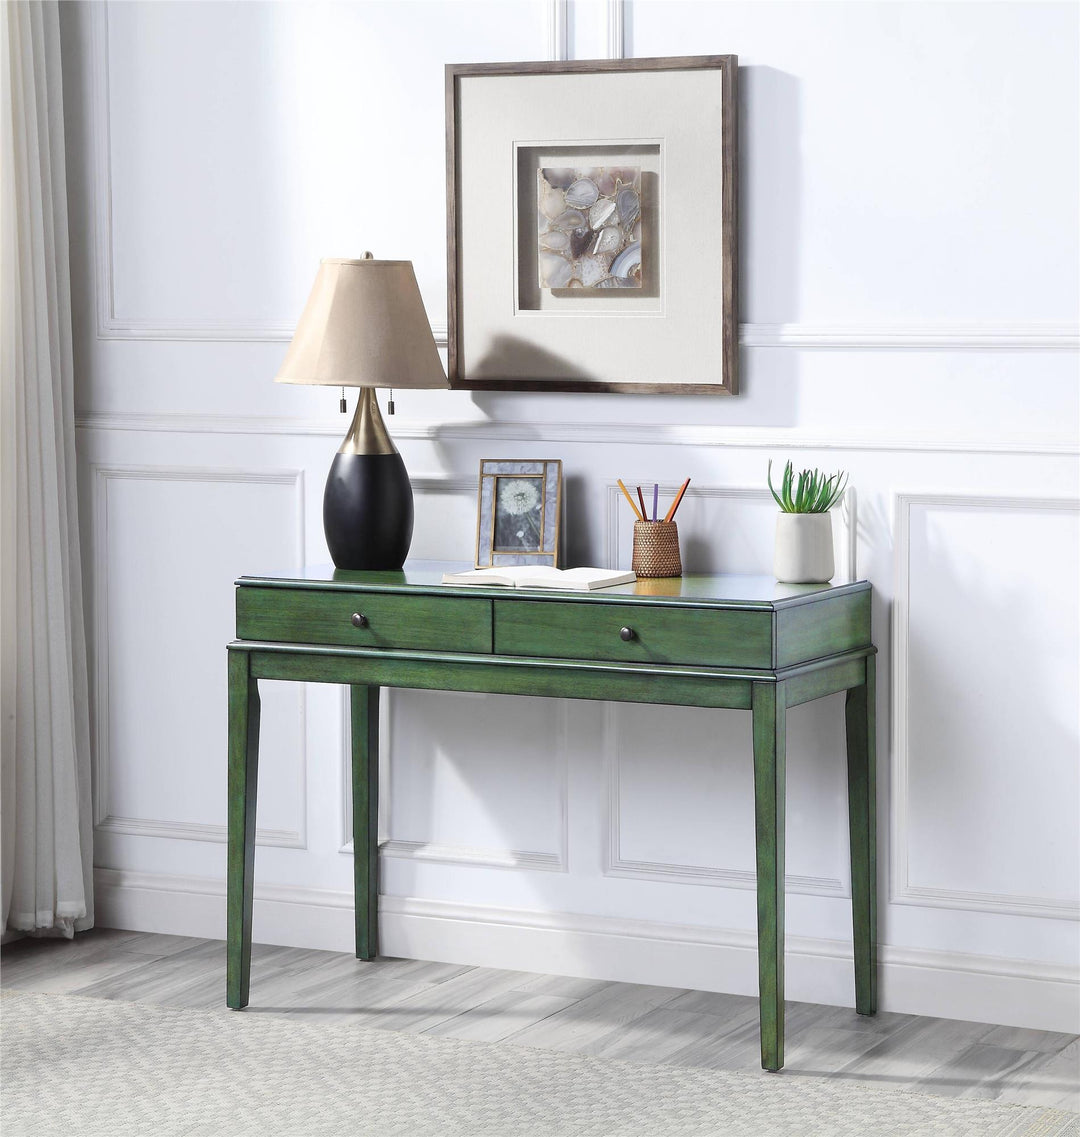 Rectangular Console Table with 2 drawers - Green